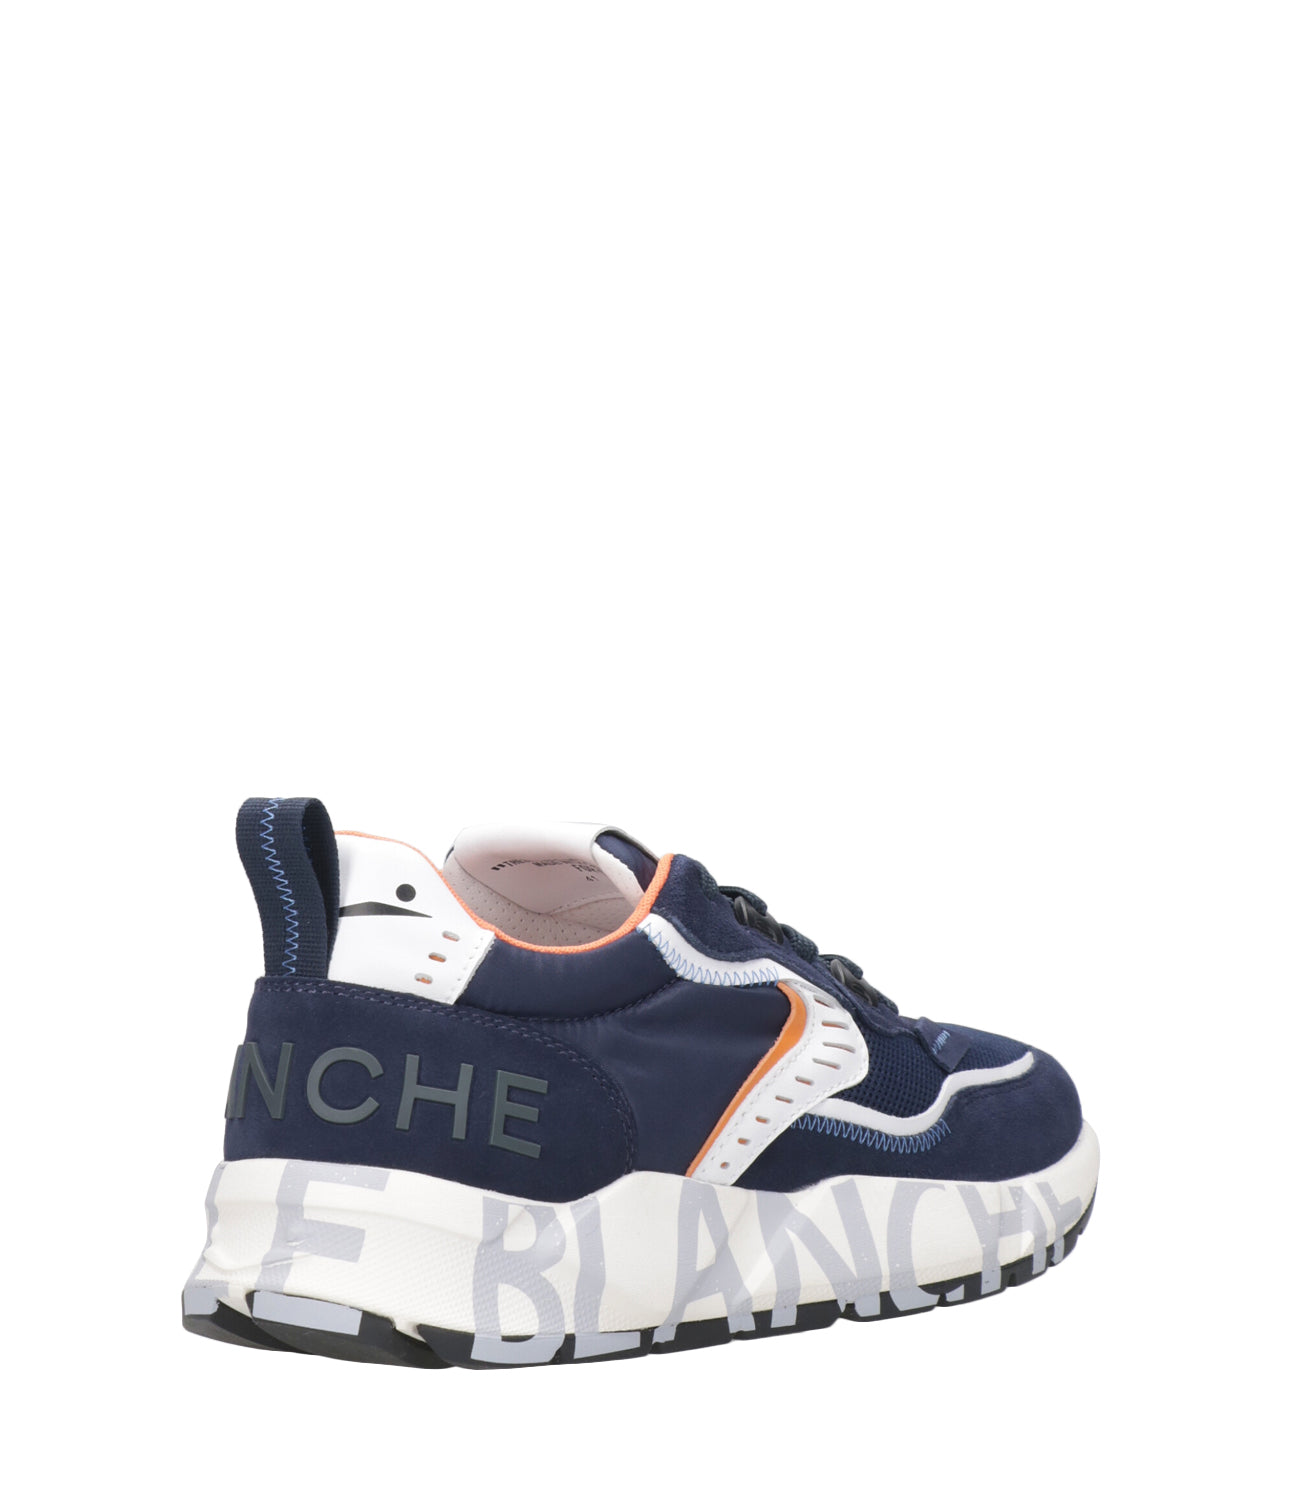 Voile Blanche | Sneakers Club01 Navy Blue and Orange